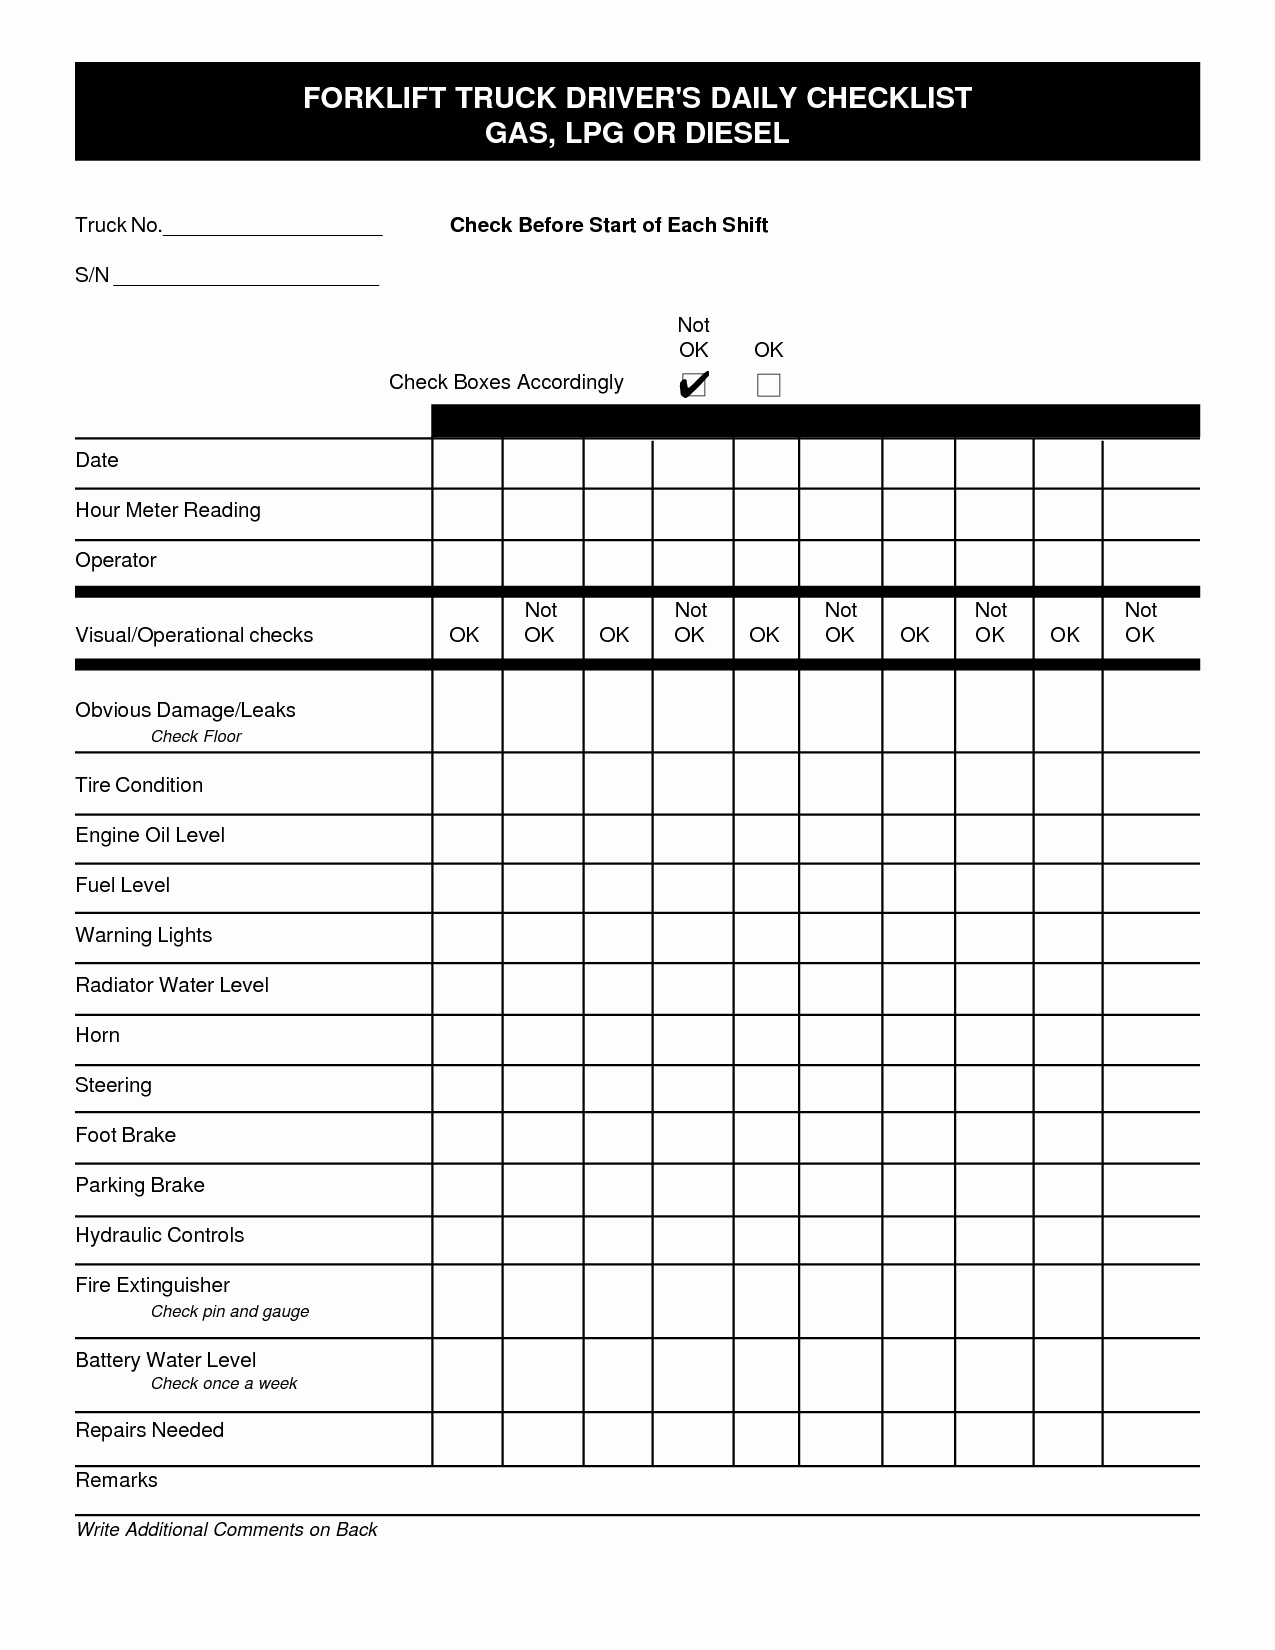 Daily Equipment Inspection form Best Of Daily Equipment Inspection forms